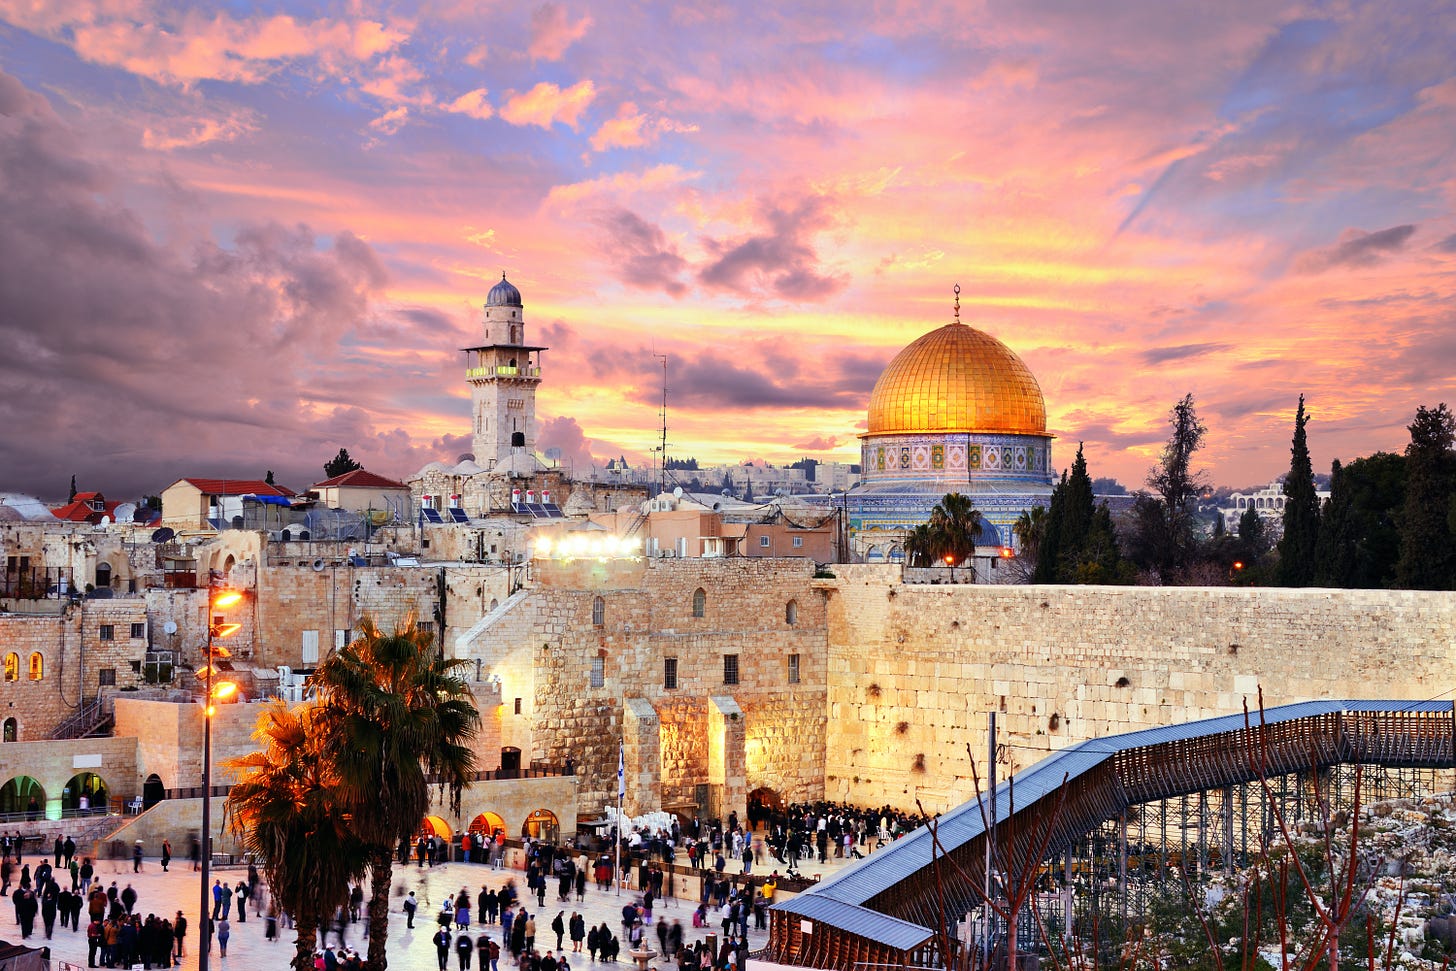 Old City Jerusalem must-see sites - from towers to Kotel tunnels